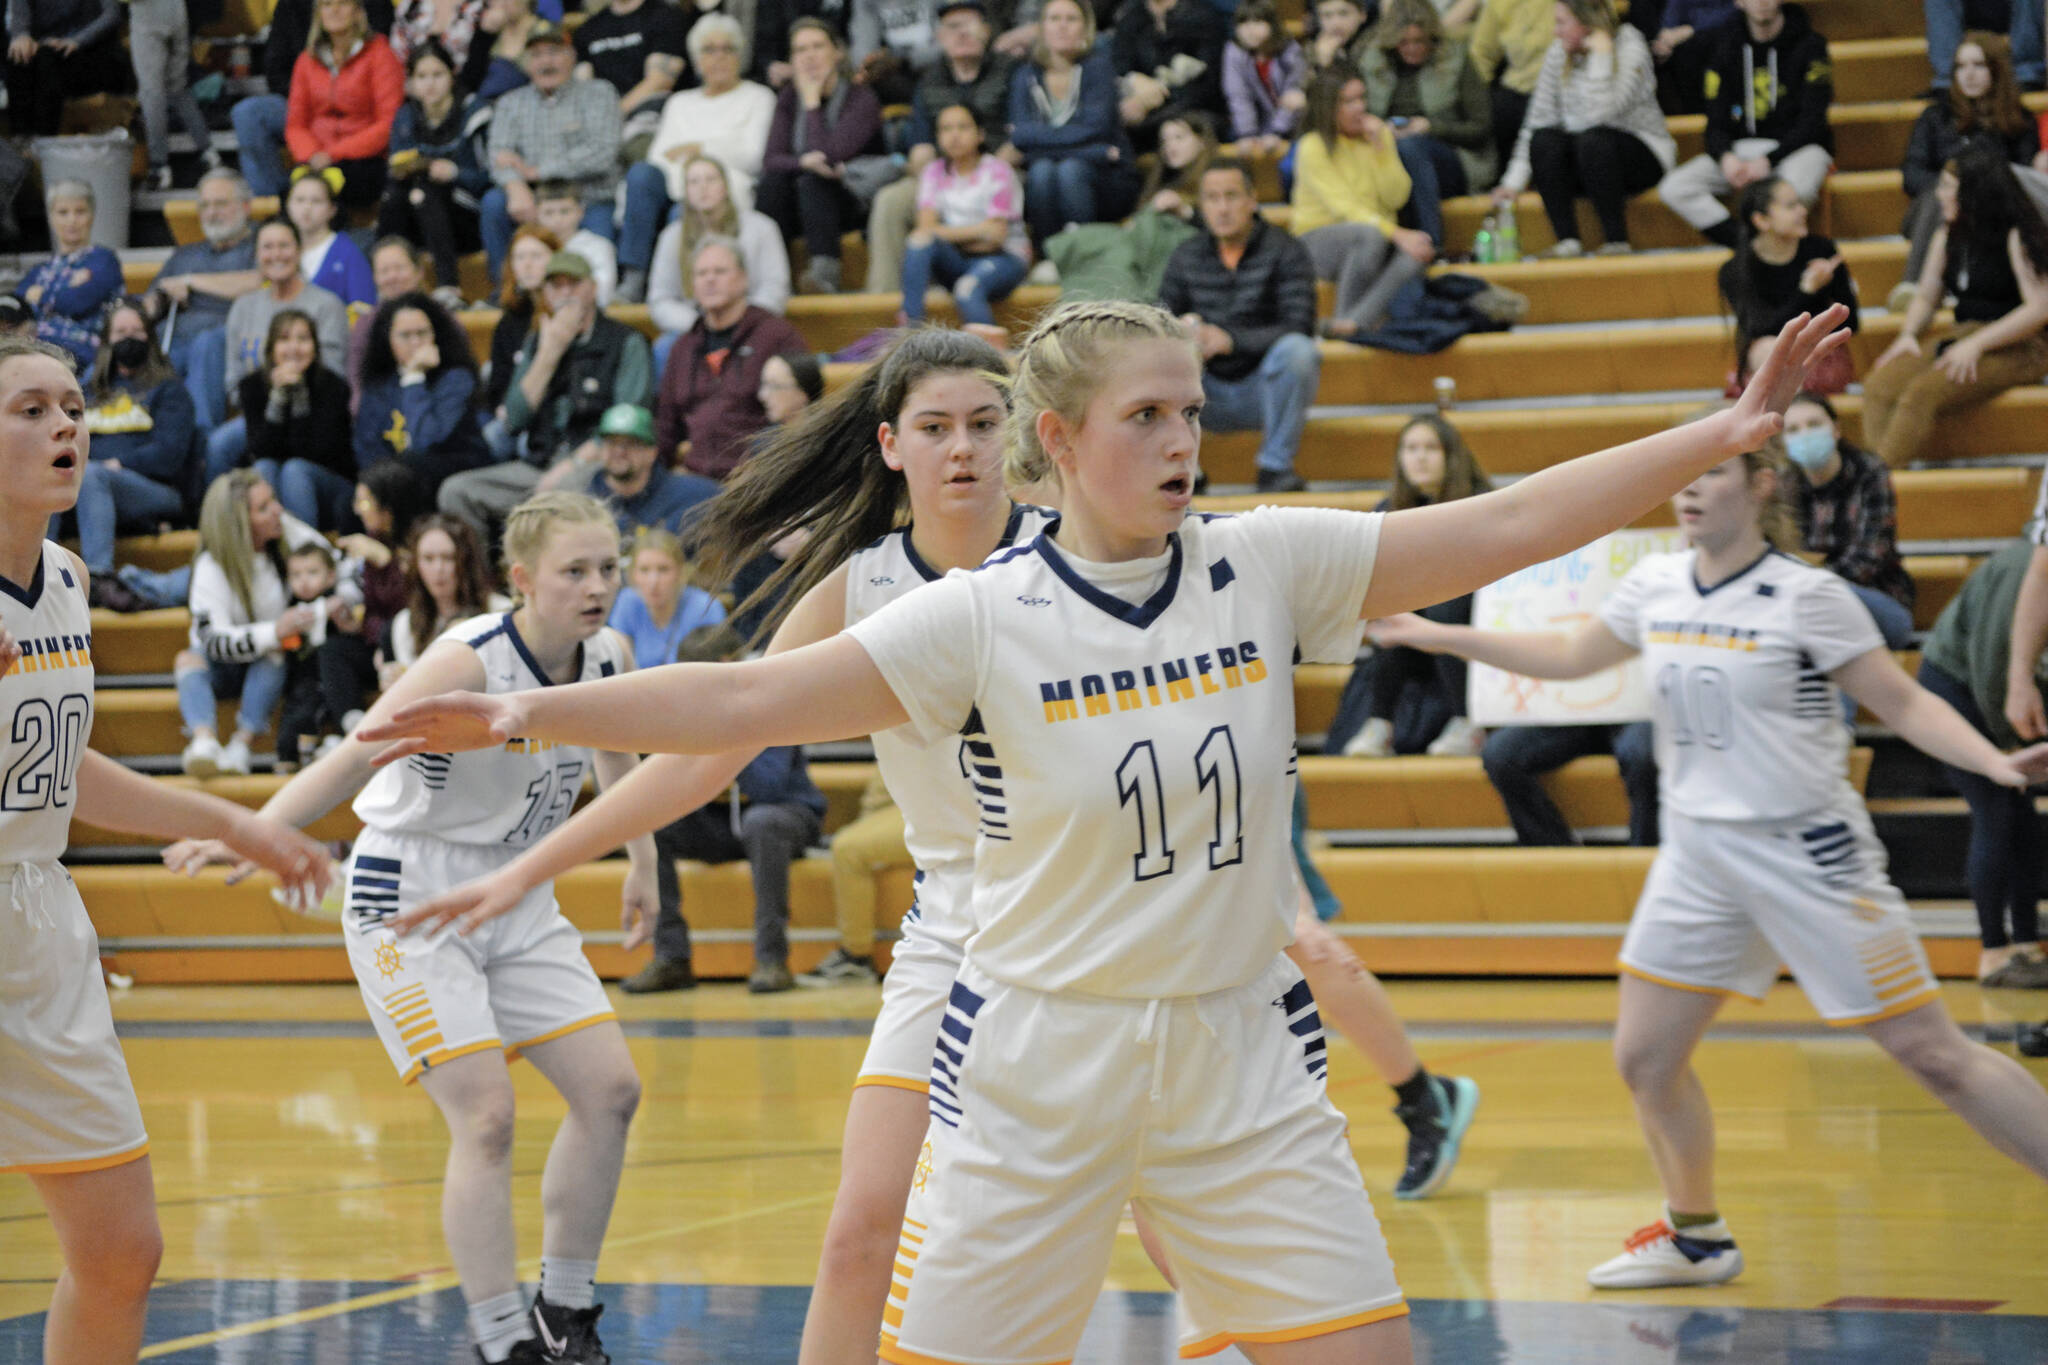 Lady Mariner Sydney Shelby and her teammates put up a defense against the Lady Bulldogs during Senior Night on Friday, Feb. 25, 2022, at the Alice Witte Gym at Homer High School in Homer, Alaska. Behind Shelby are, from left to right, Mel Morris, Hannah Stonorov, Delilah Harris, and Bethany Engebretsen. (Photo by Michael Armstrong/Homer News)